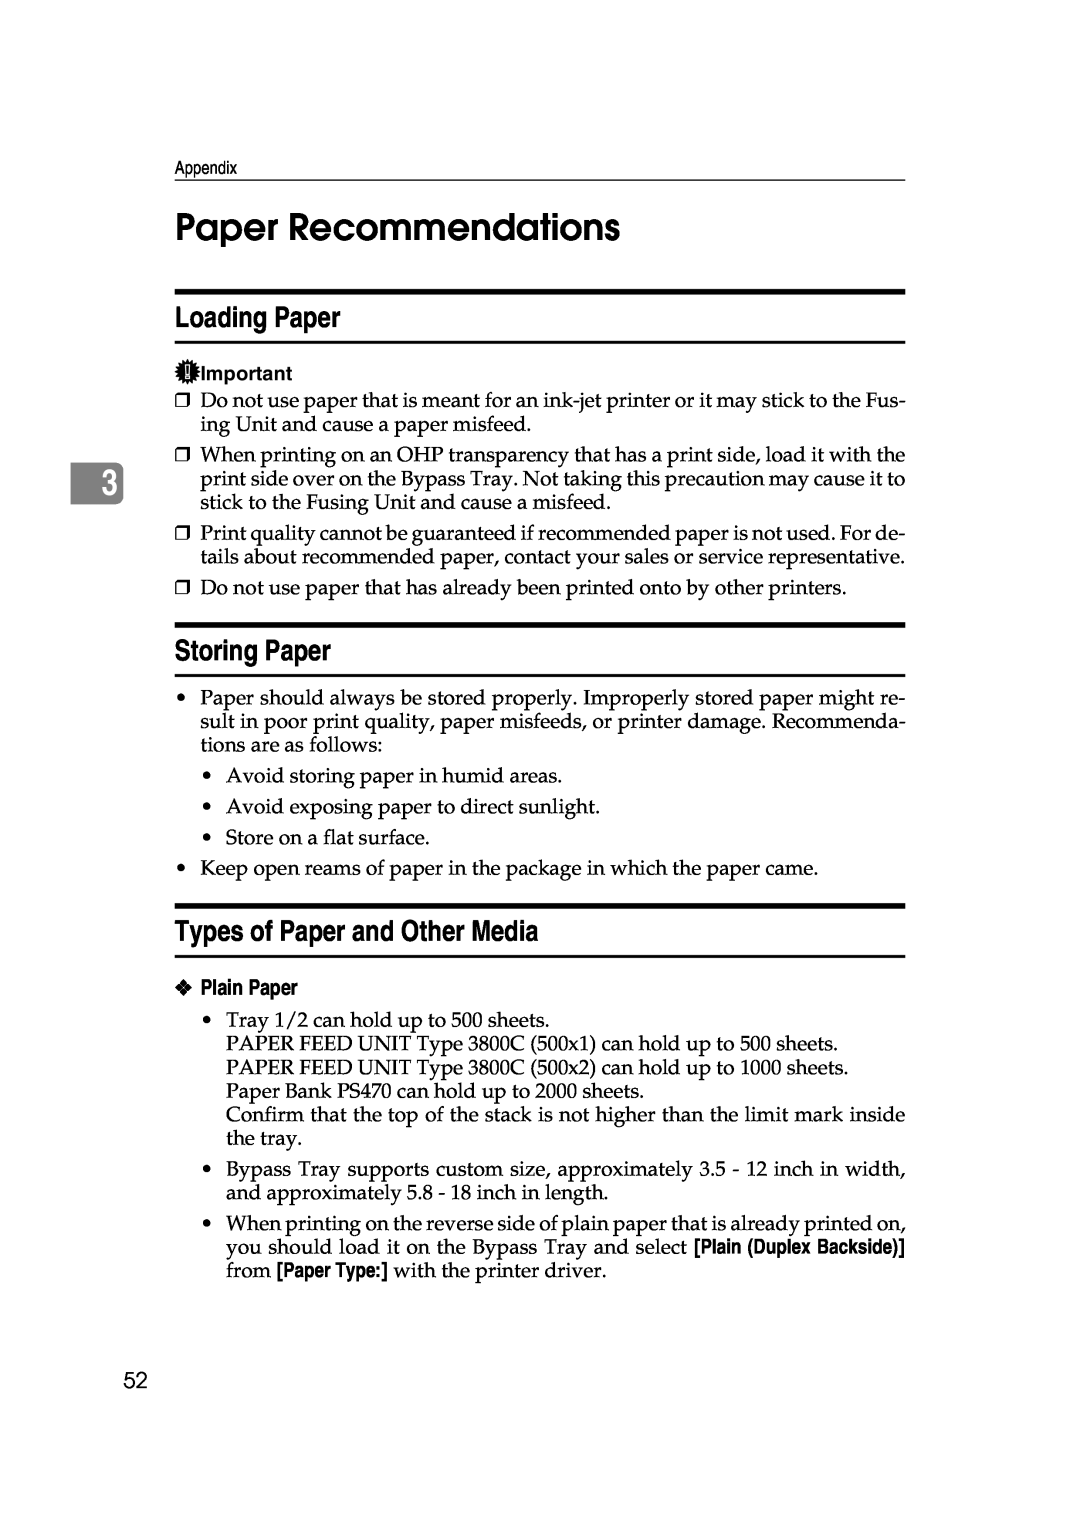 Savin SLP38C manual Paper Recommendations, Loading Paper, Storing Paper, Types of Paper and Other Media 